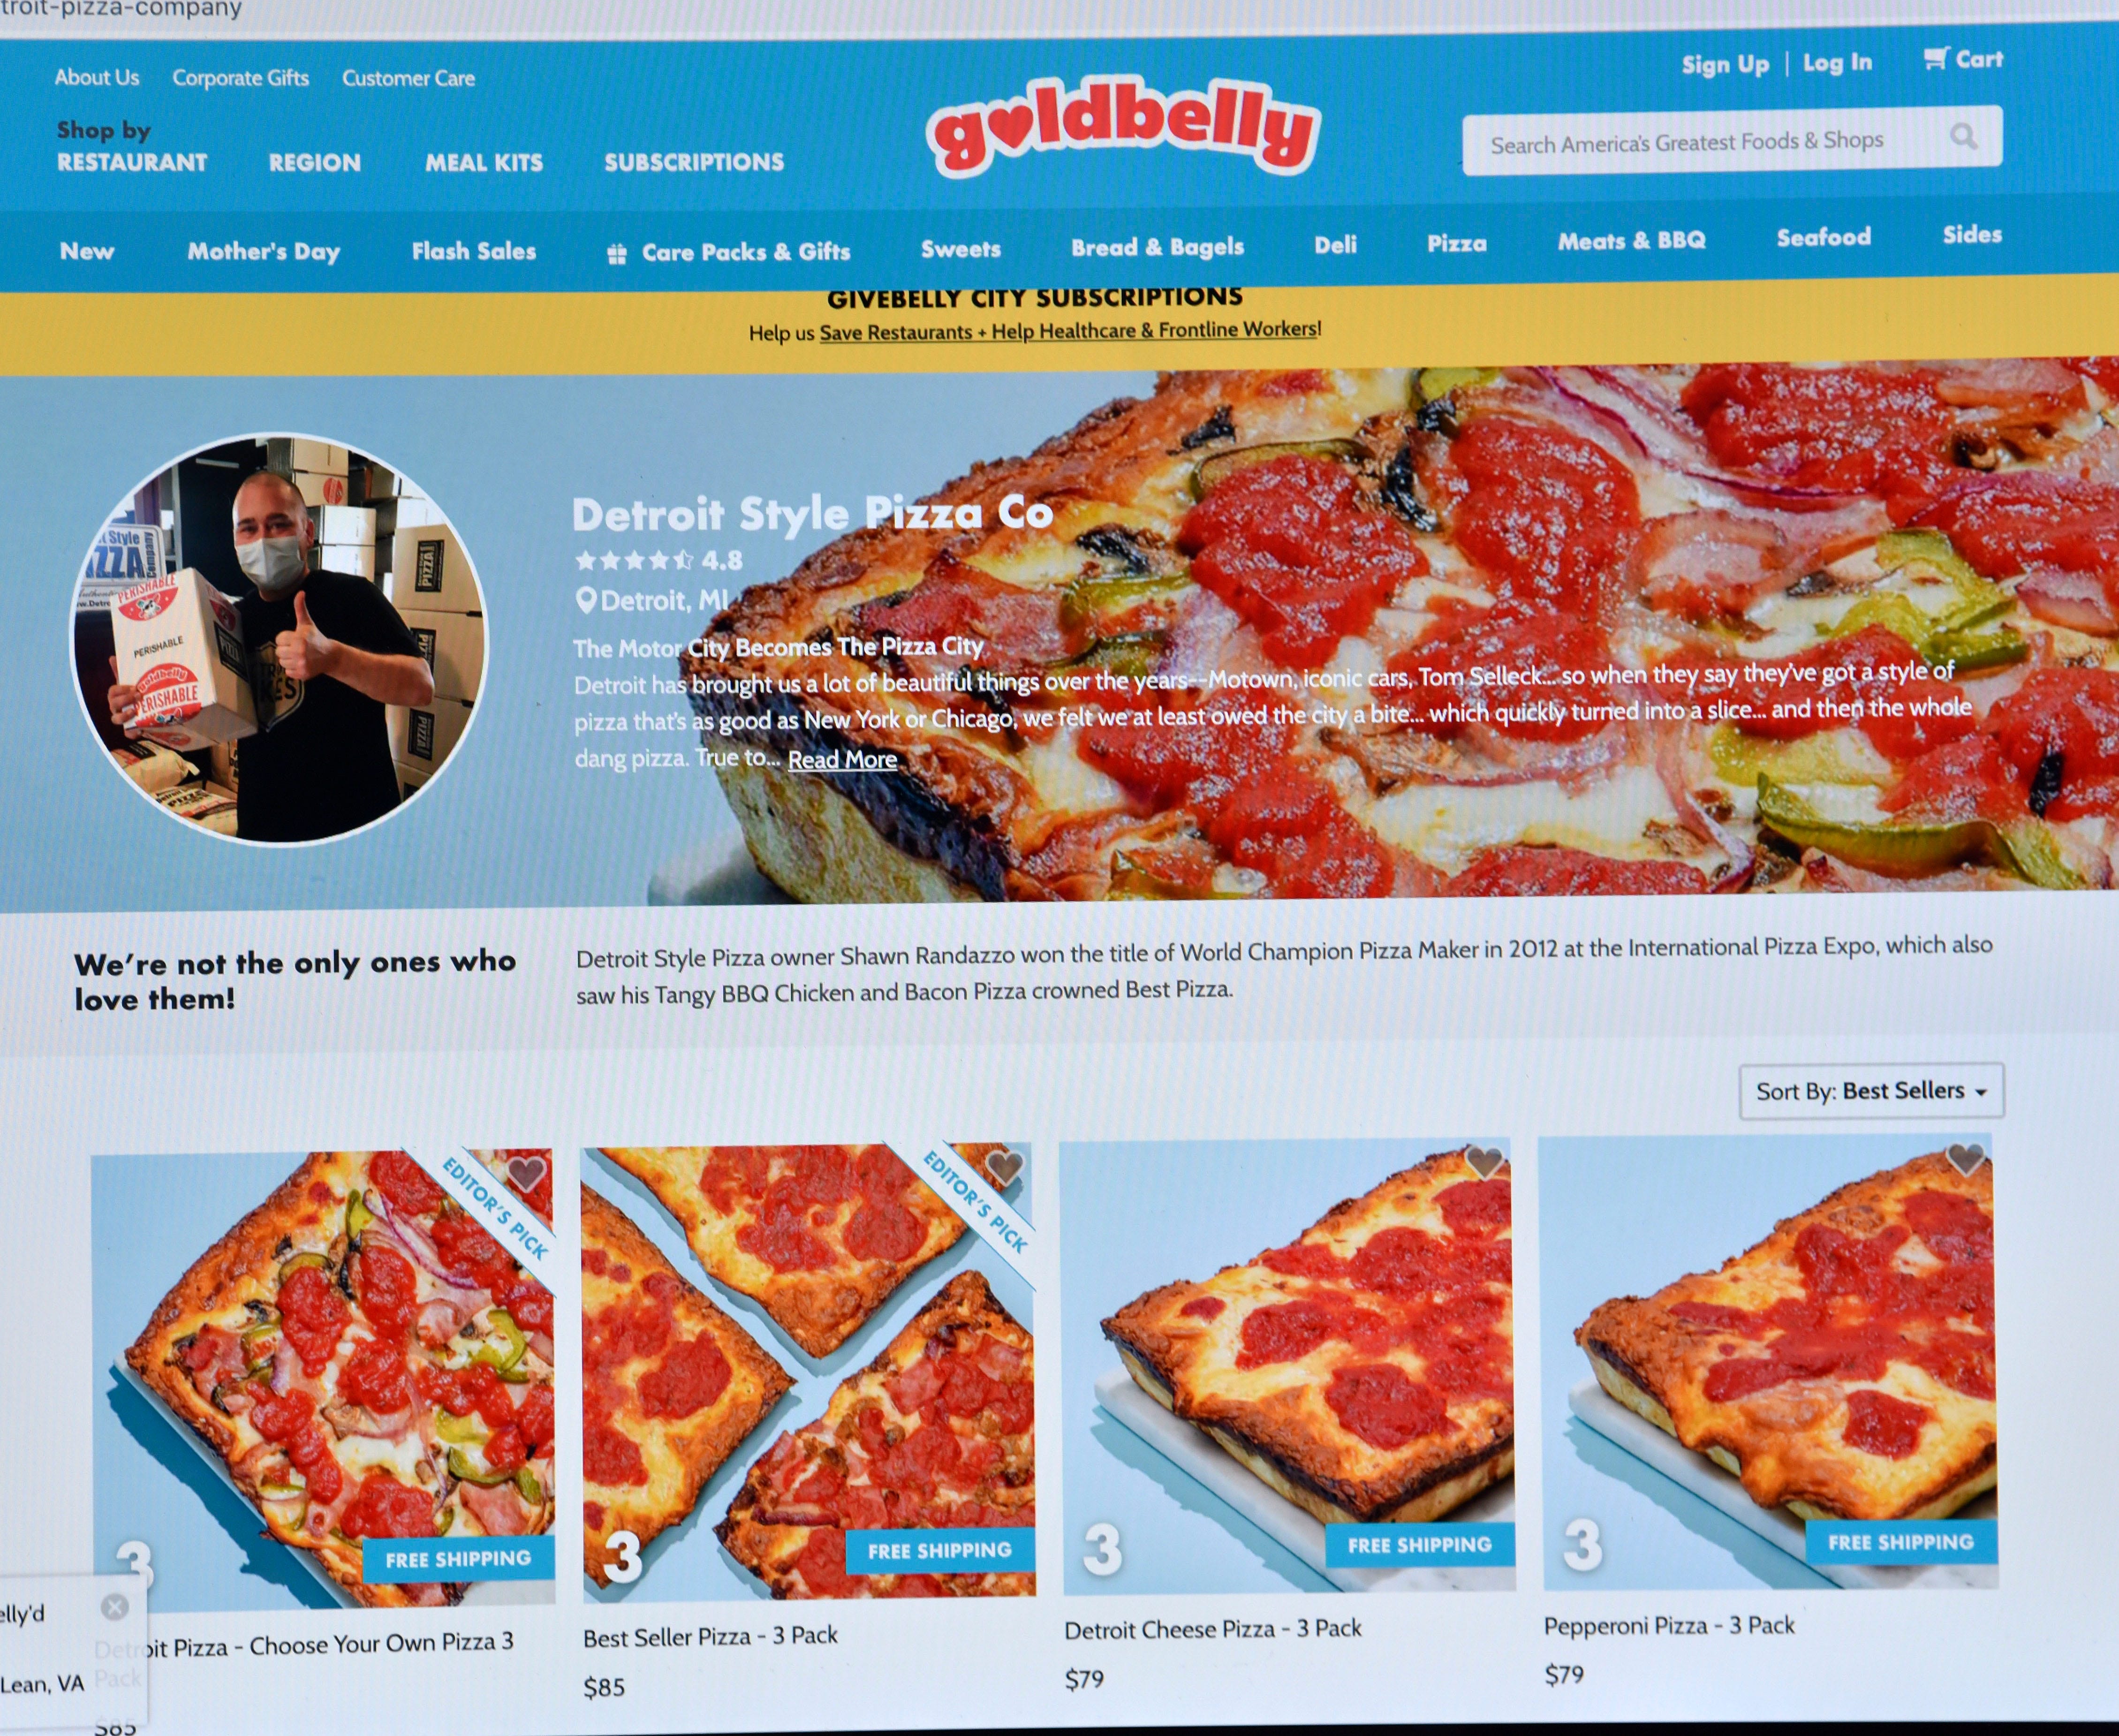 A portrait of Detroit Style Pizza Company co-owner Shawn Randazzo and his pizza is featured on the goldbelly website.